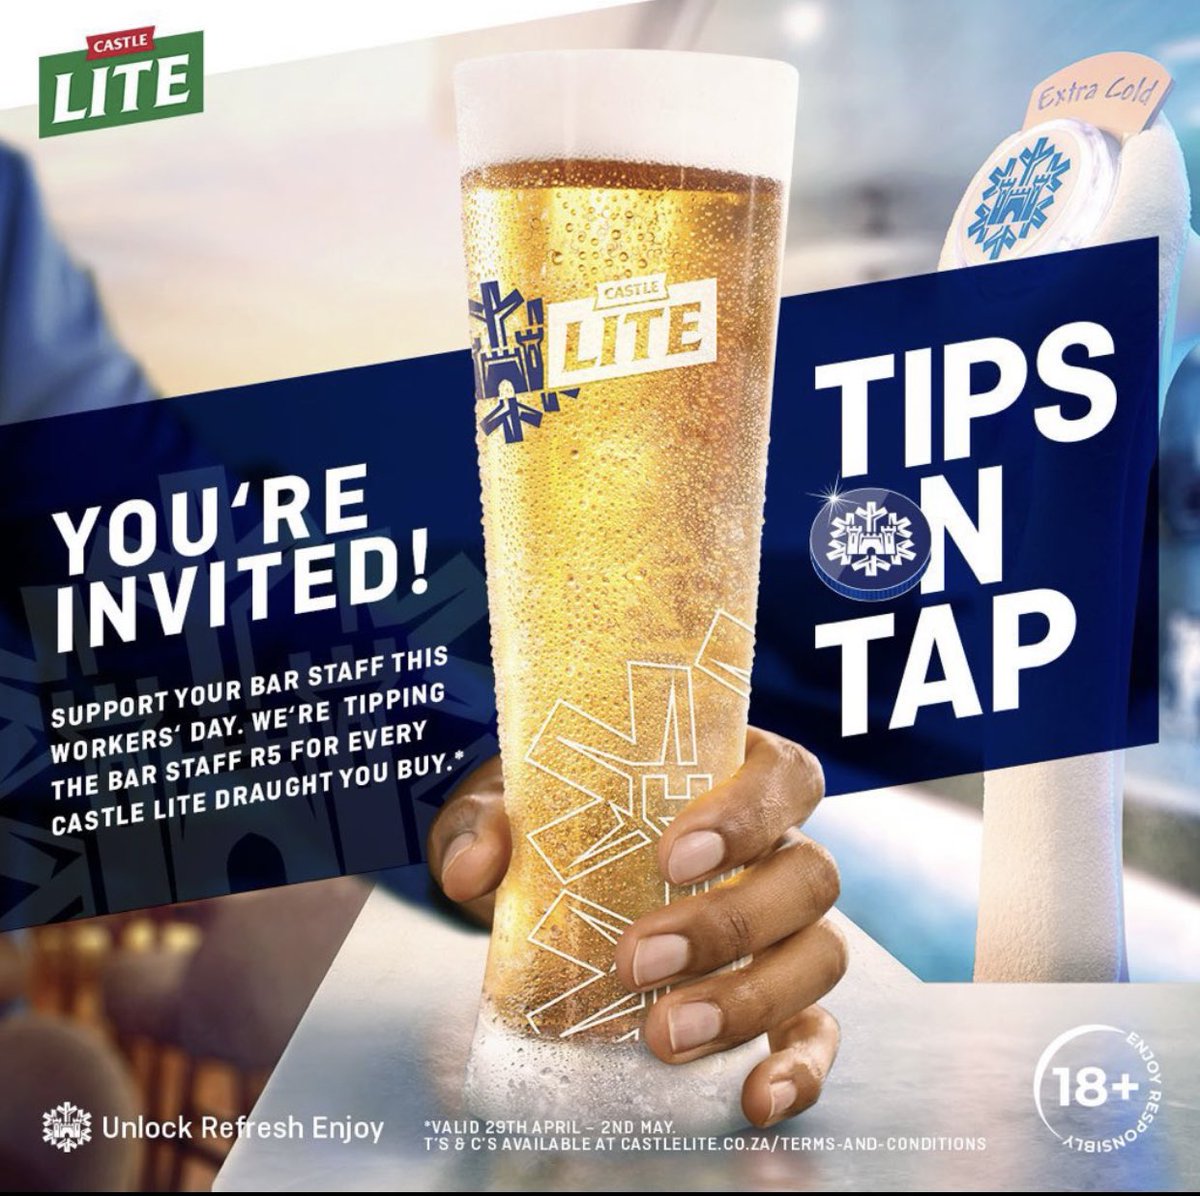 #CastleLite is encouraging everyone to support your bar staff this worker’s day simply but buying a 500ml of CastleLite #TipsOnTap ✅let’s drink!